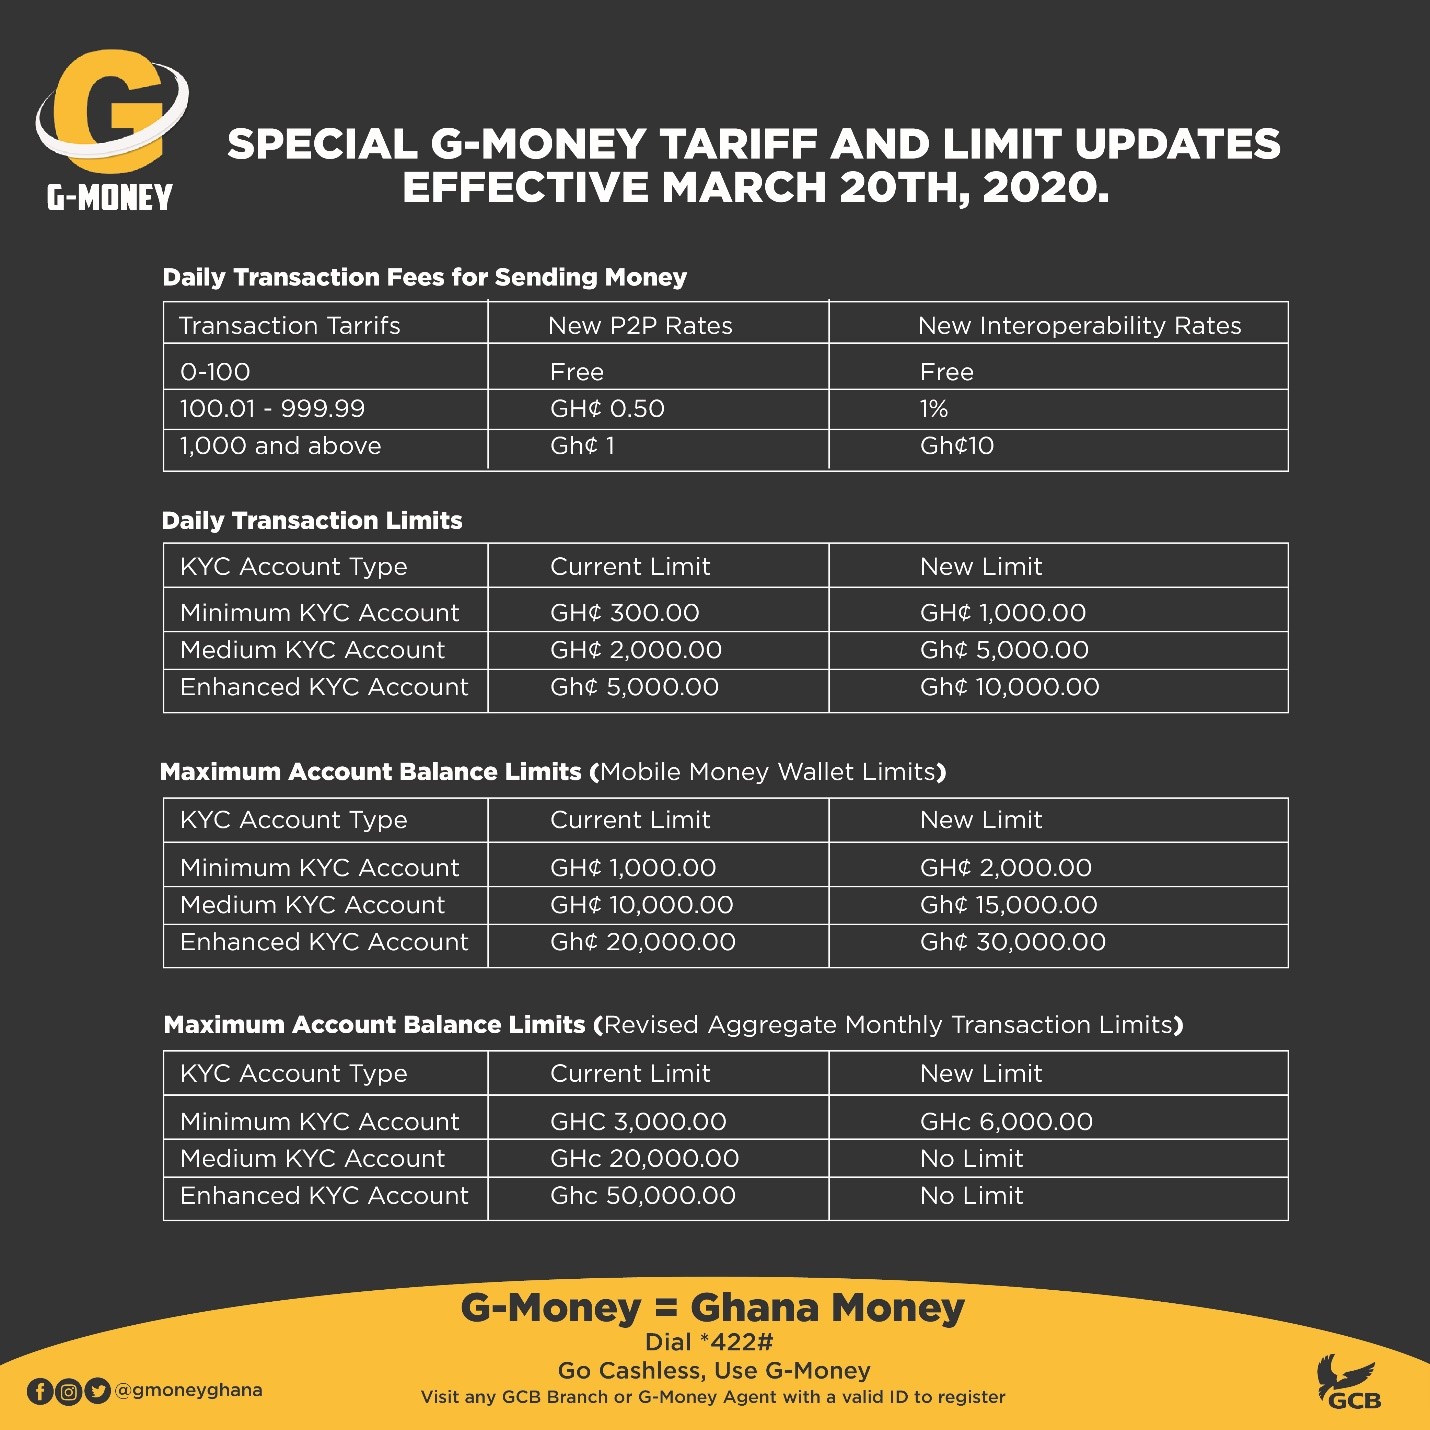 Gcb Bank Introduces Special Tariffs And Limits For Customers On G Money Service Home Goldstreet Business